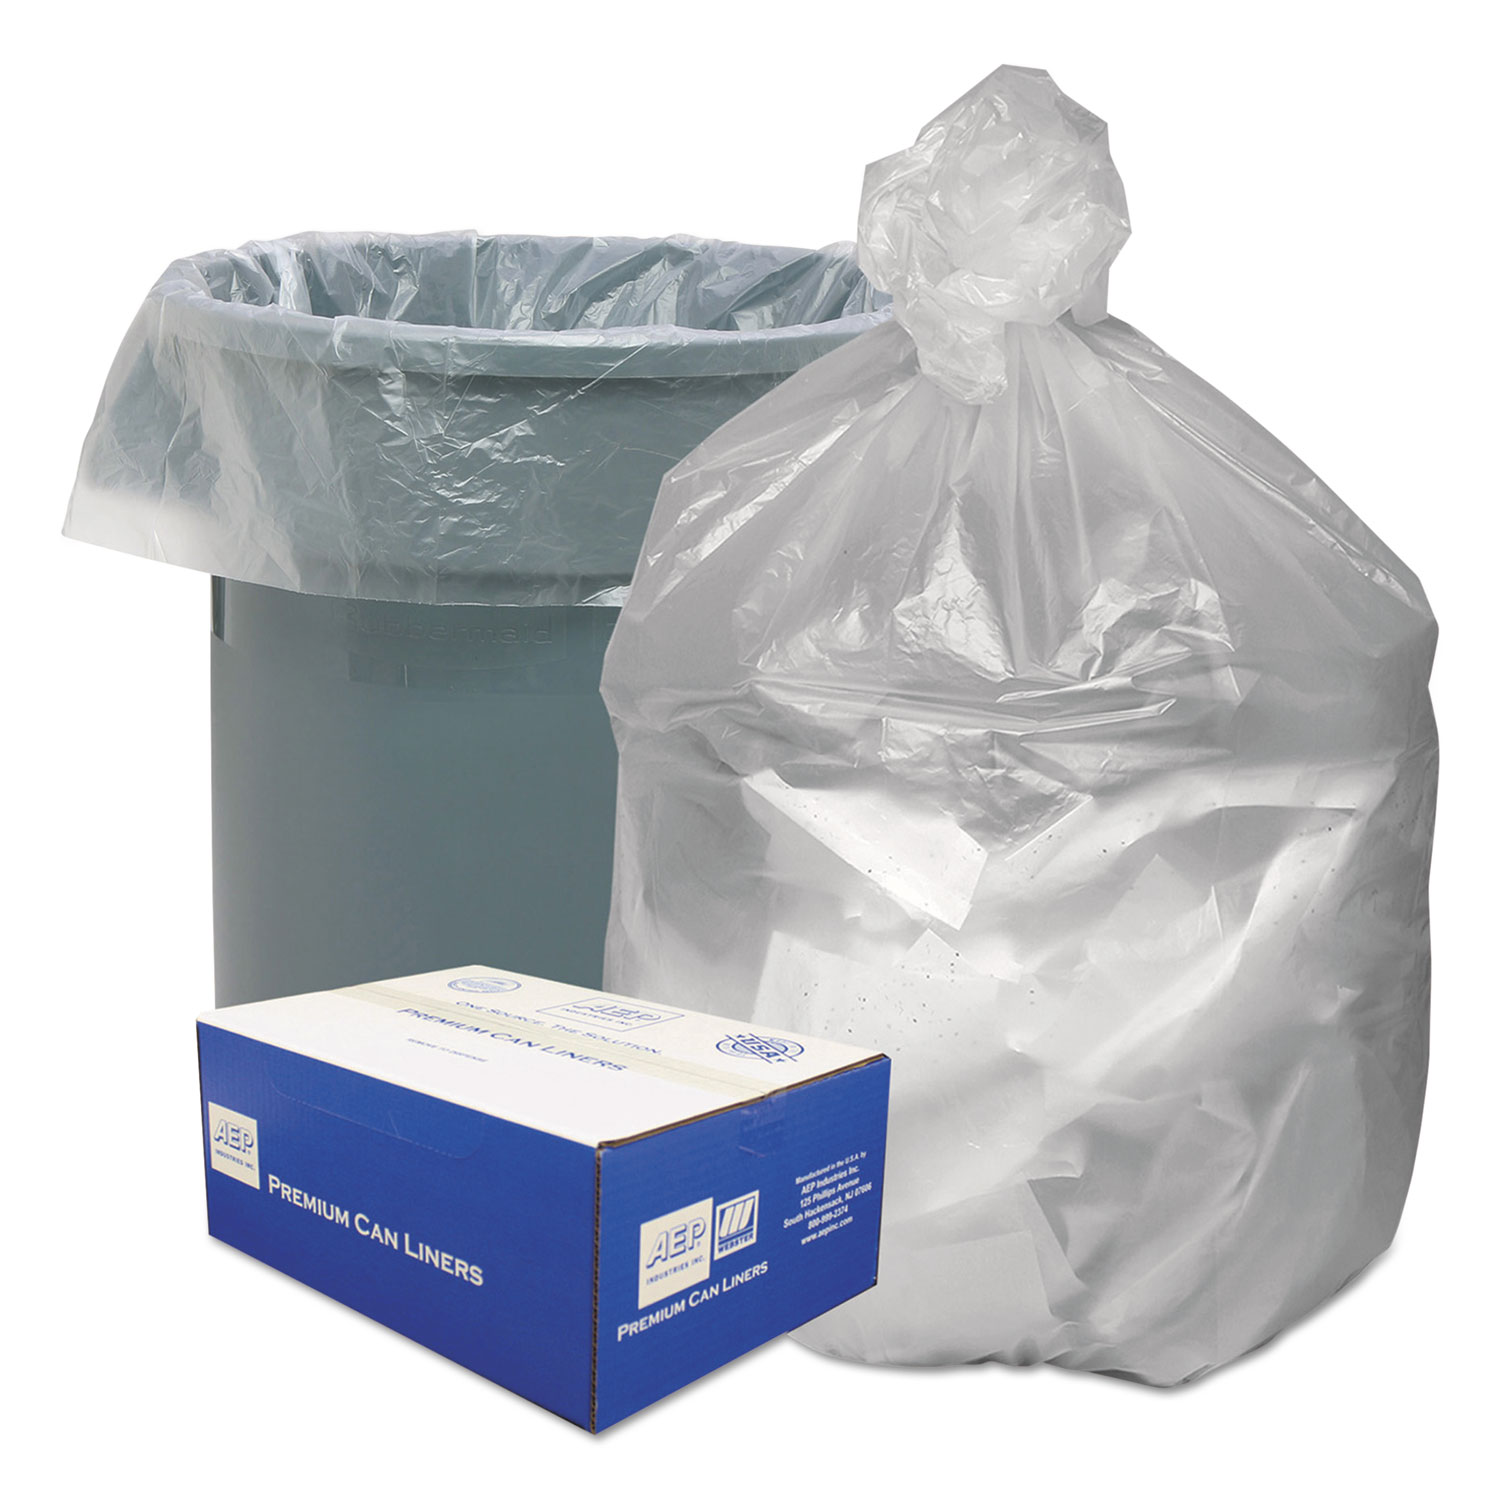  Good 'n Tuff GNT3037 Waste Can Liners, 30 gal, 8 microns, 30 x 36, Natural, 500/Carton (WBIGNT3037) 